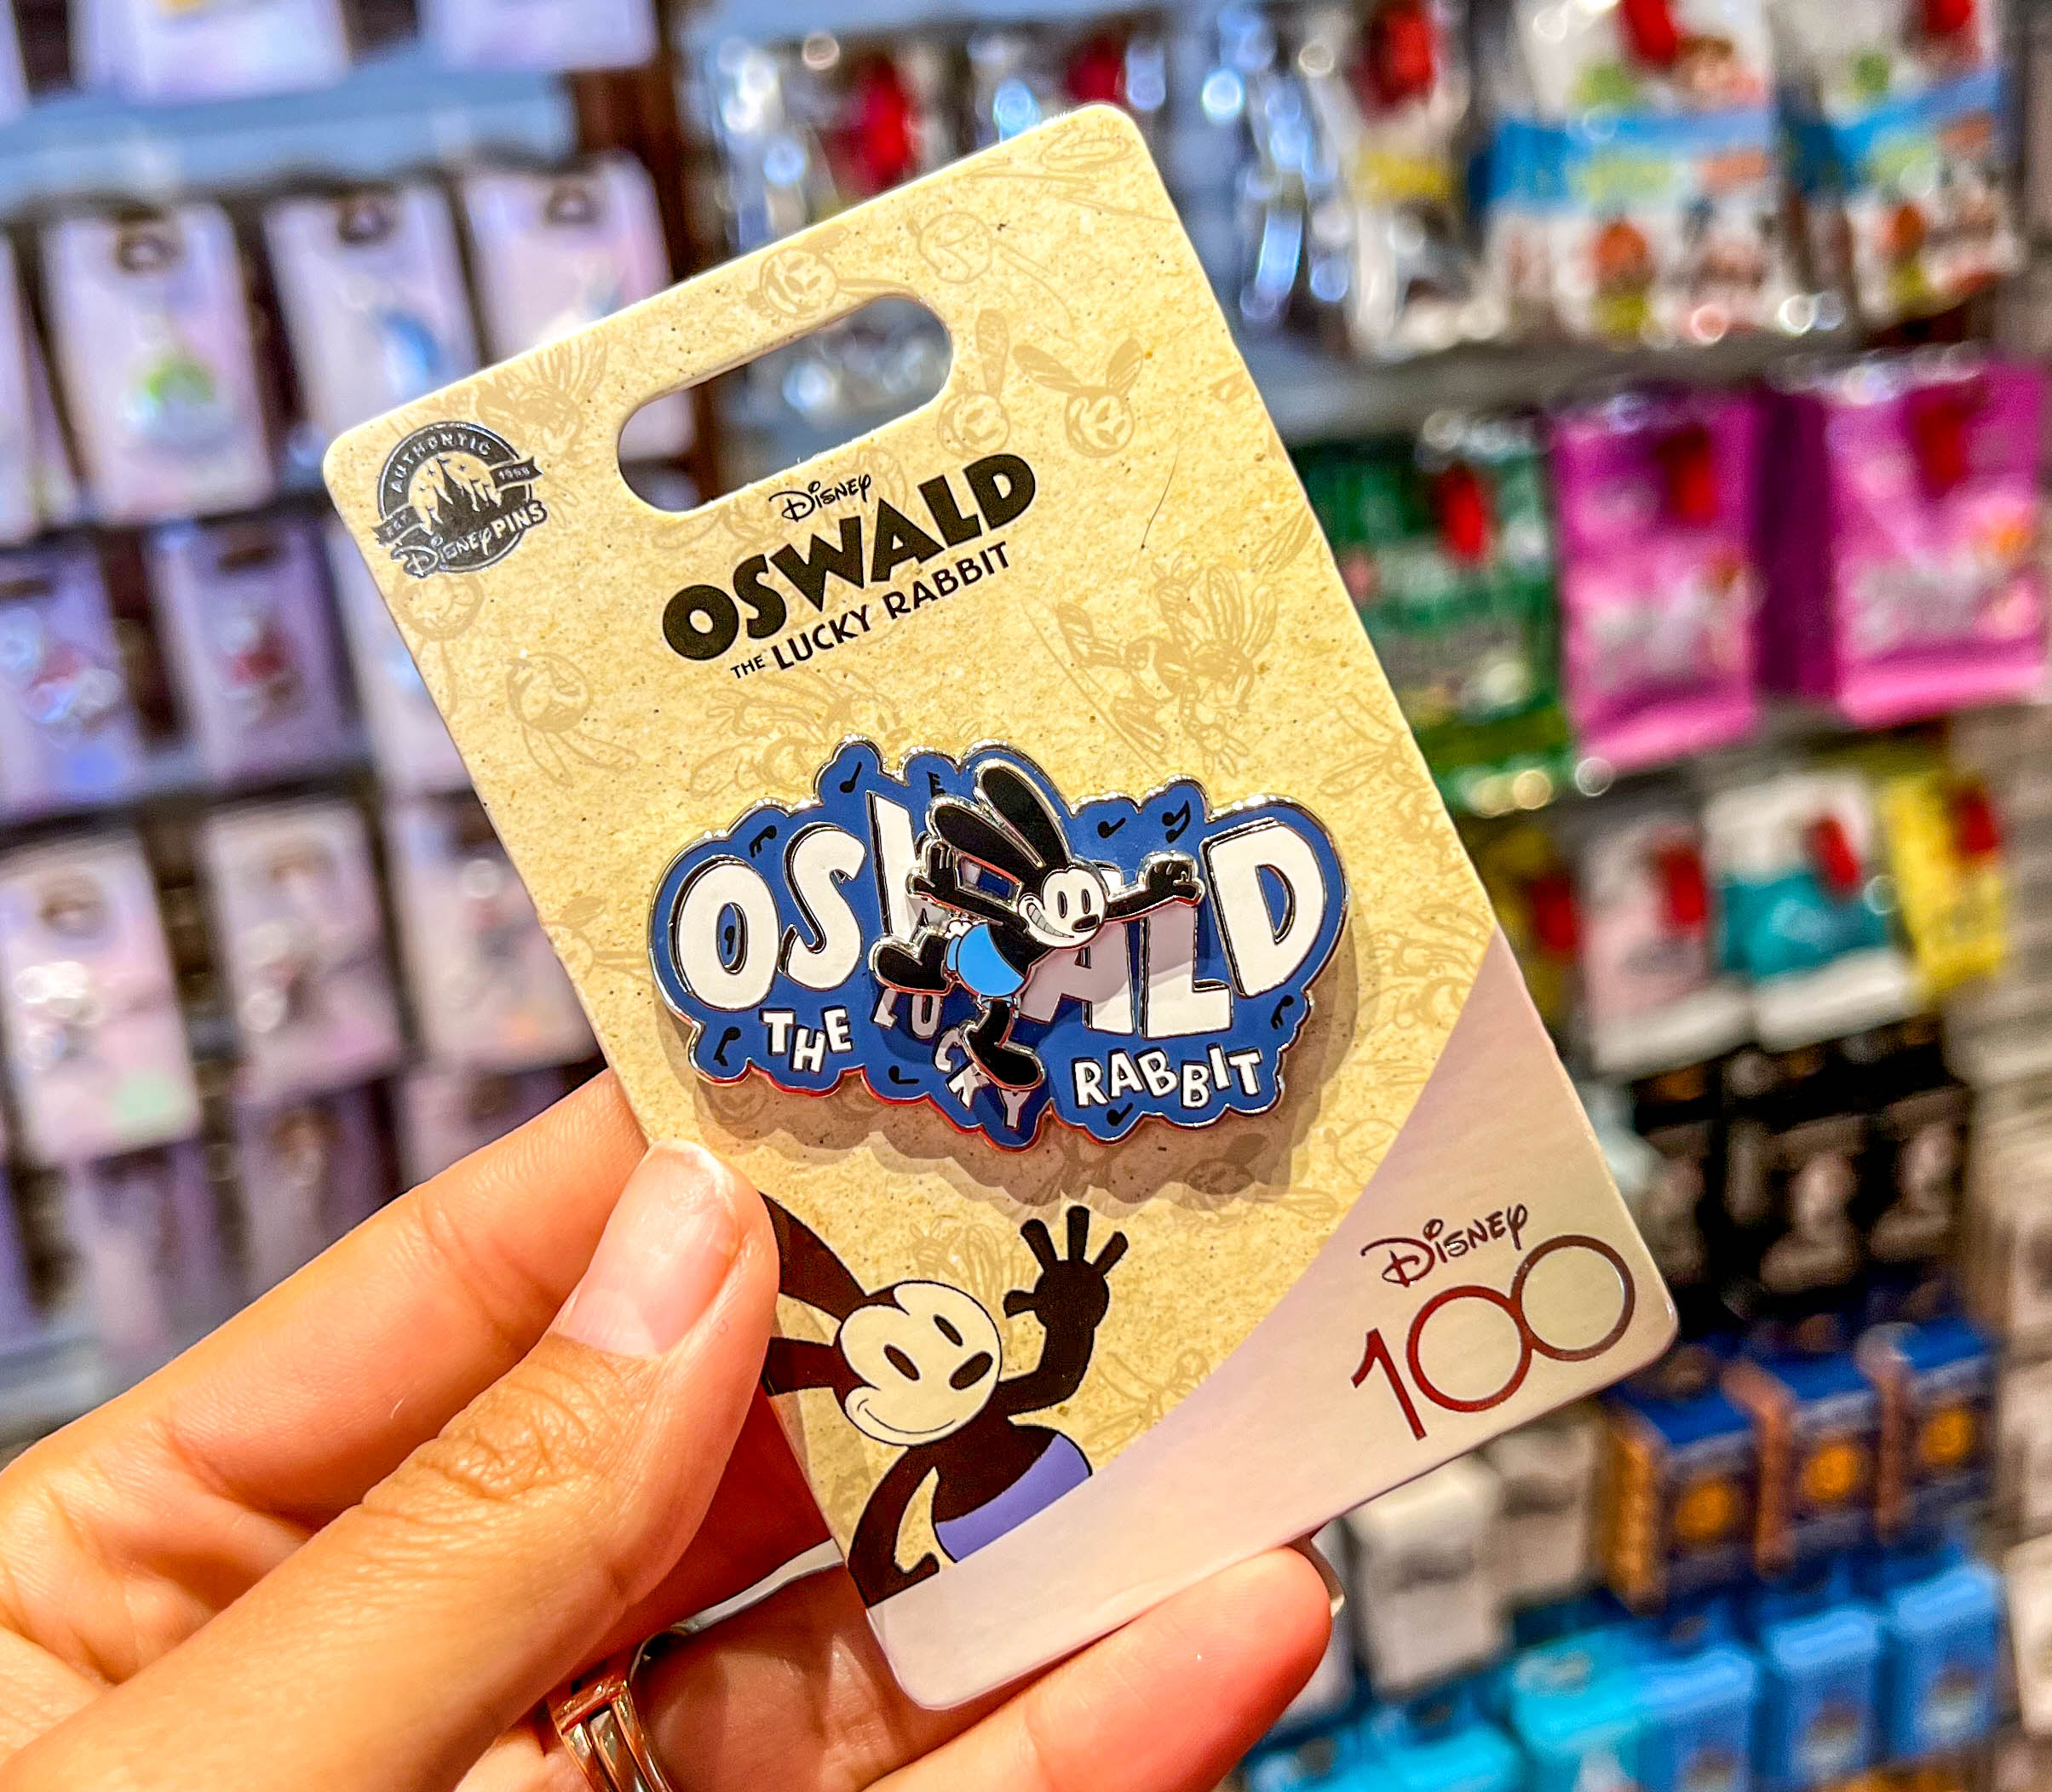 NEW Oswald the Lucky Rabbit Merchandise Collection Found in Disney